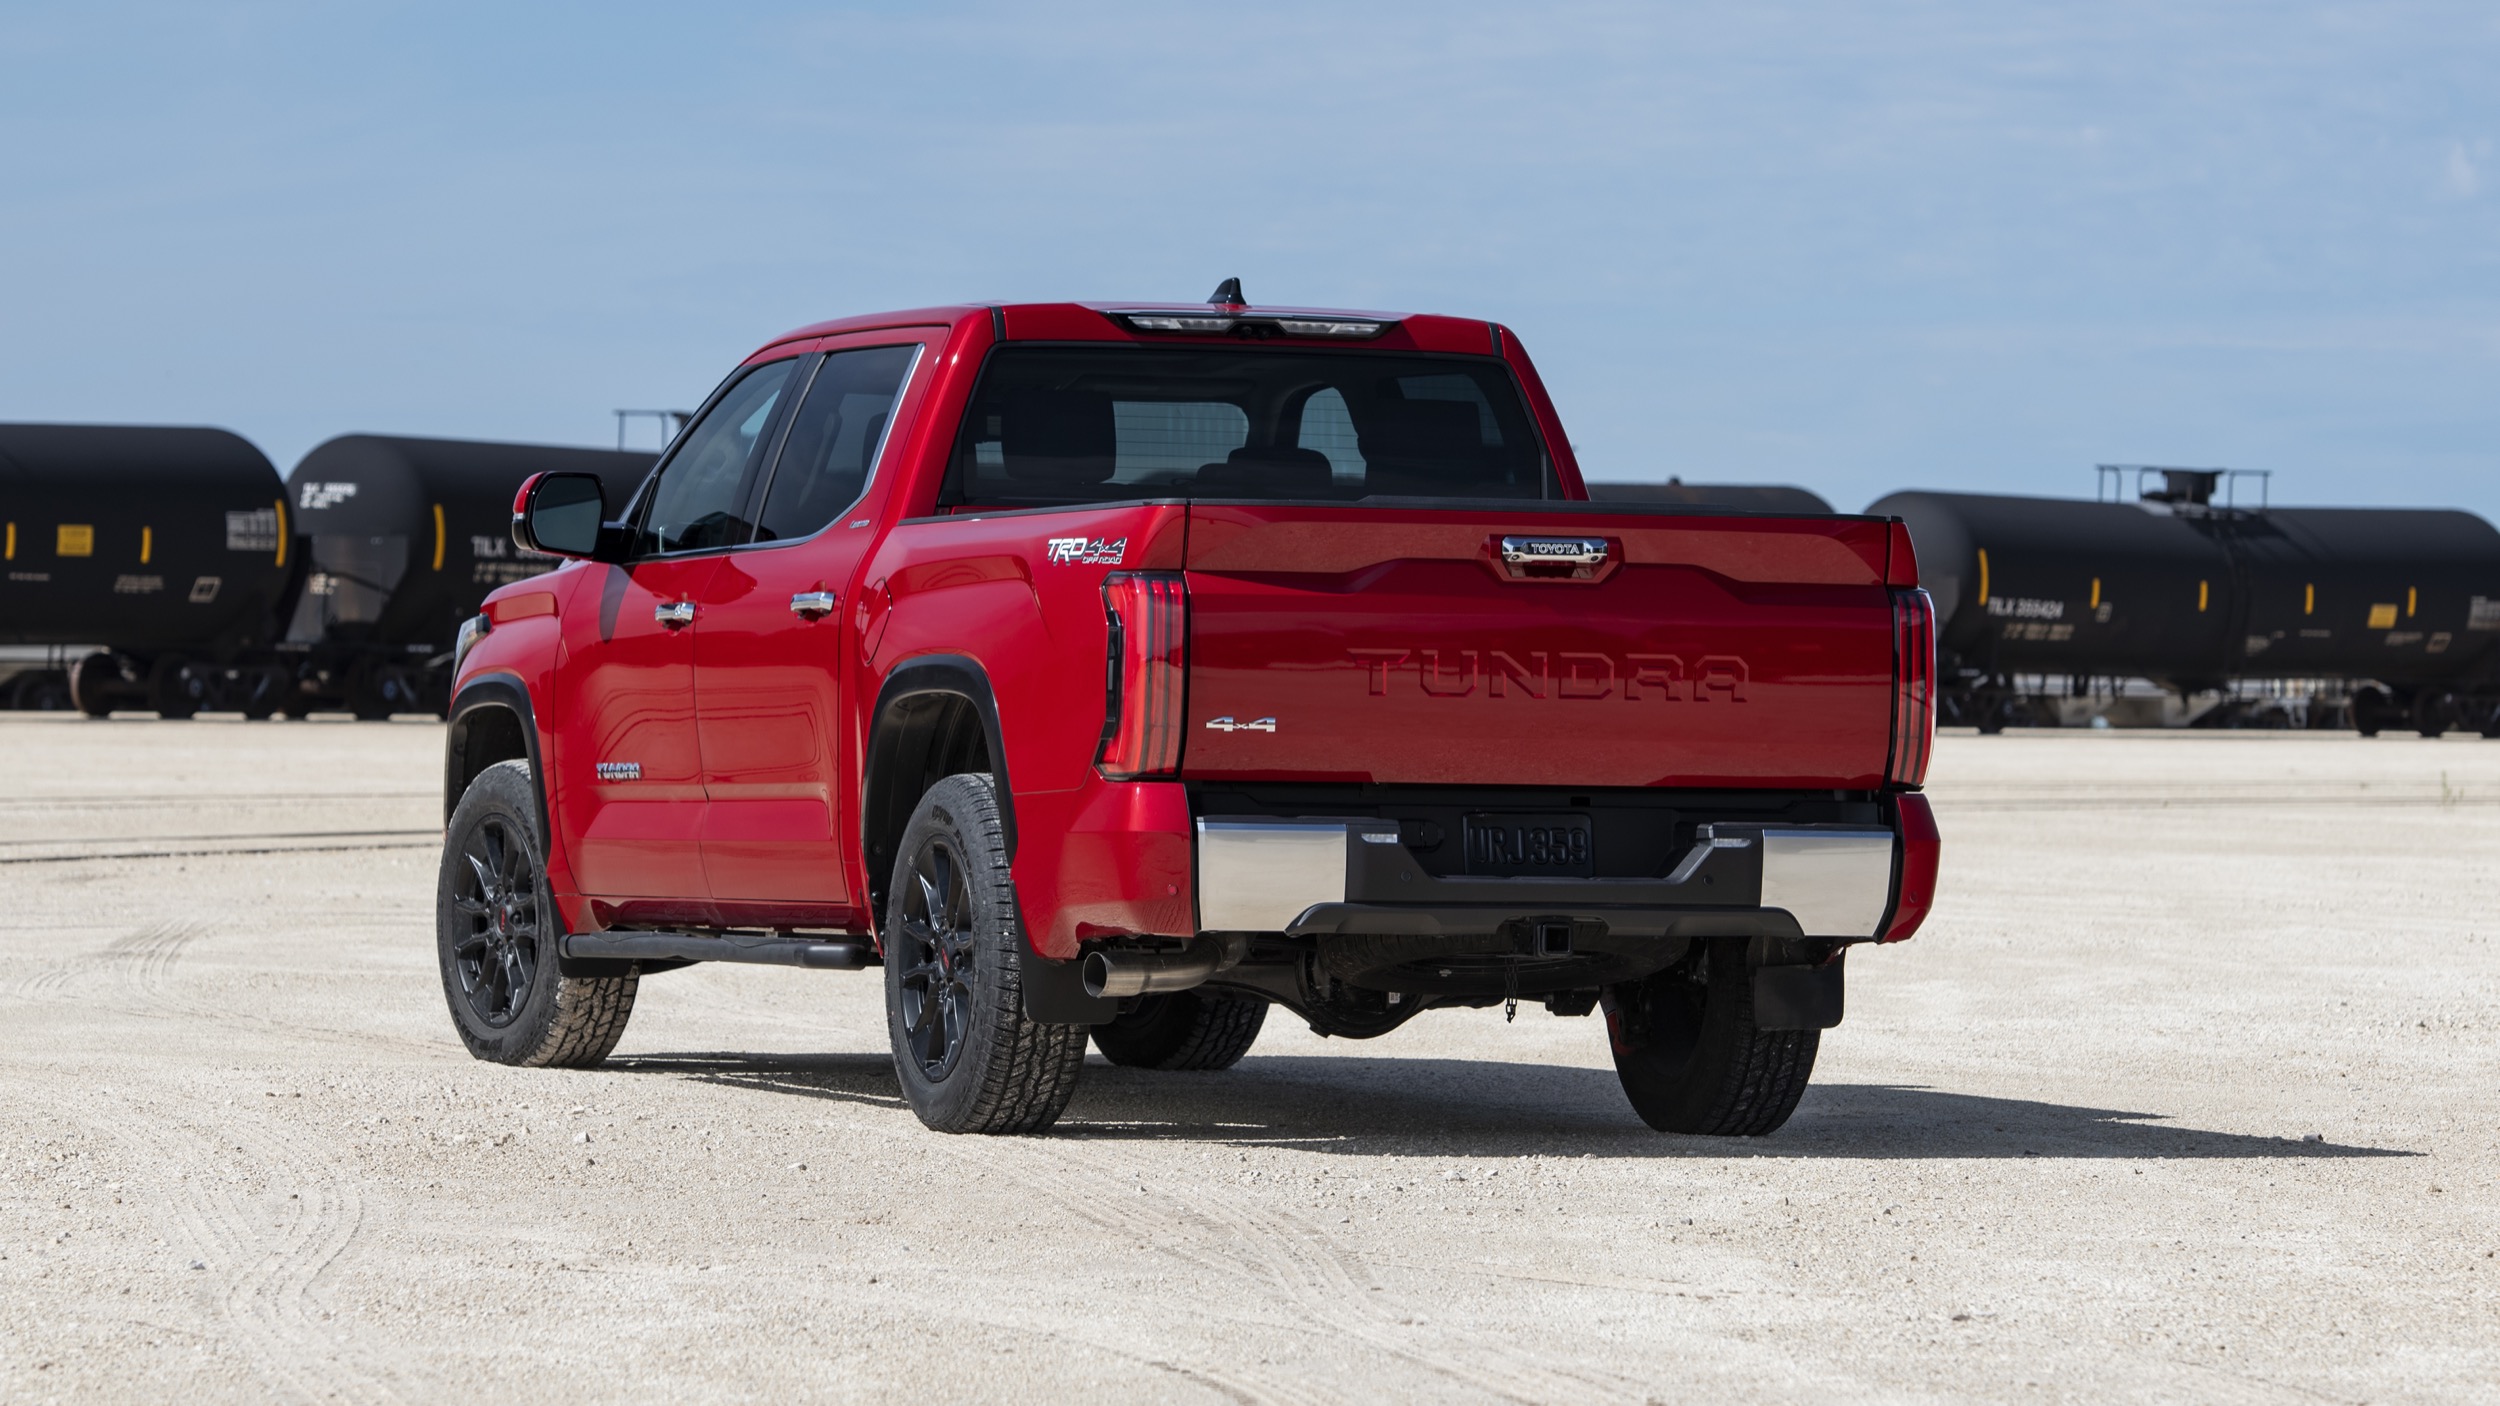 2022 Toyota Tundra Limited TRD OffRoad Photo Gallery